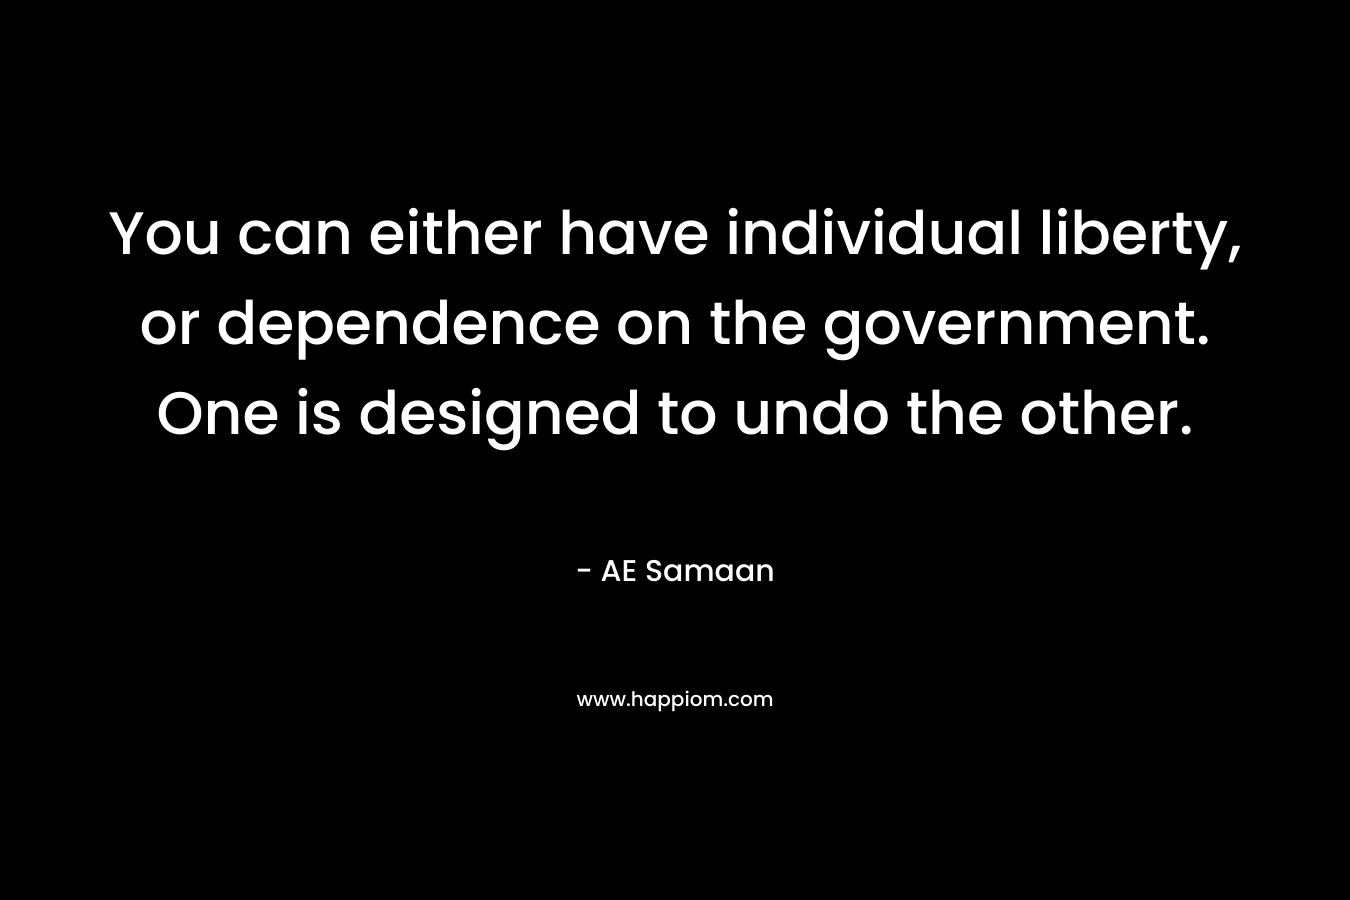 You can either have individual liberty, or dependence on the government. One is designed to undo the other.